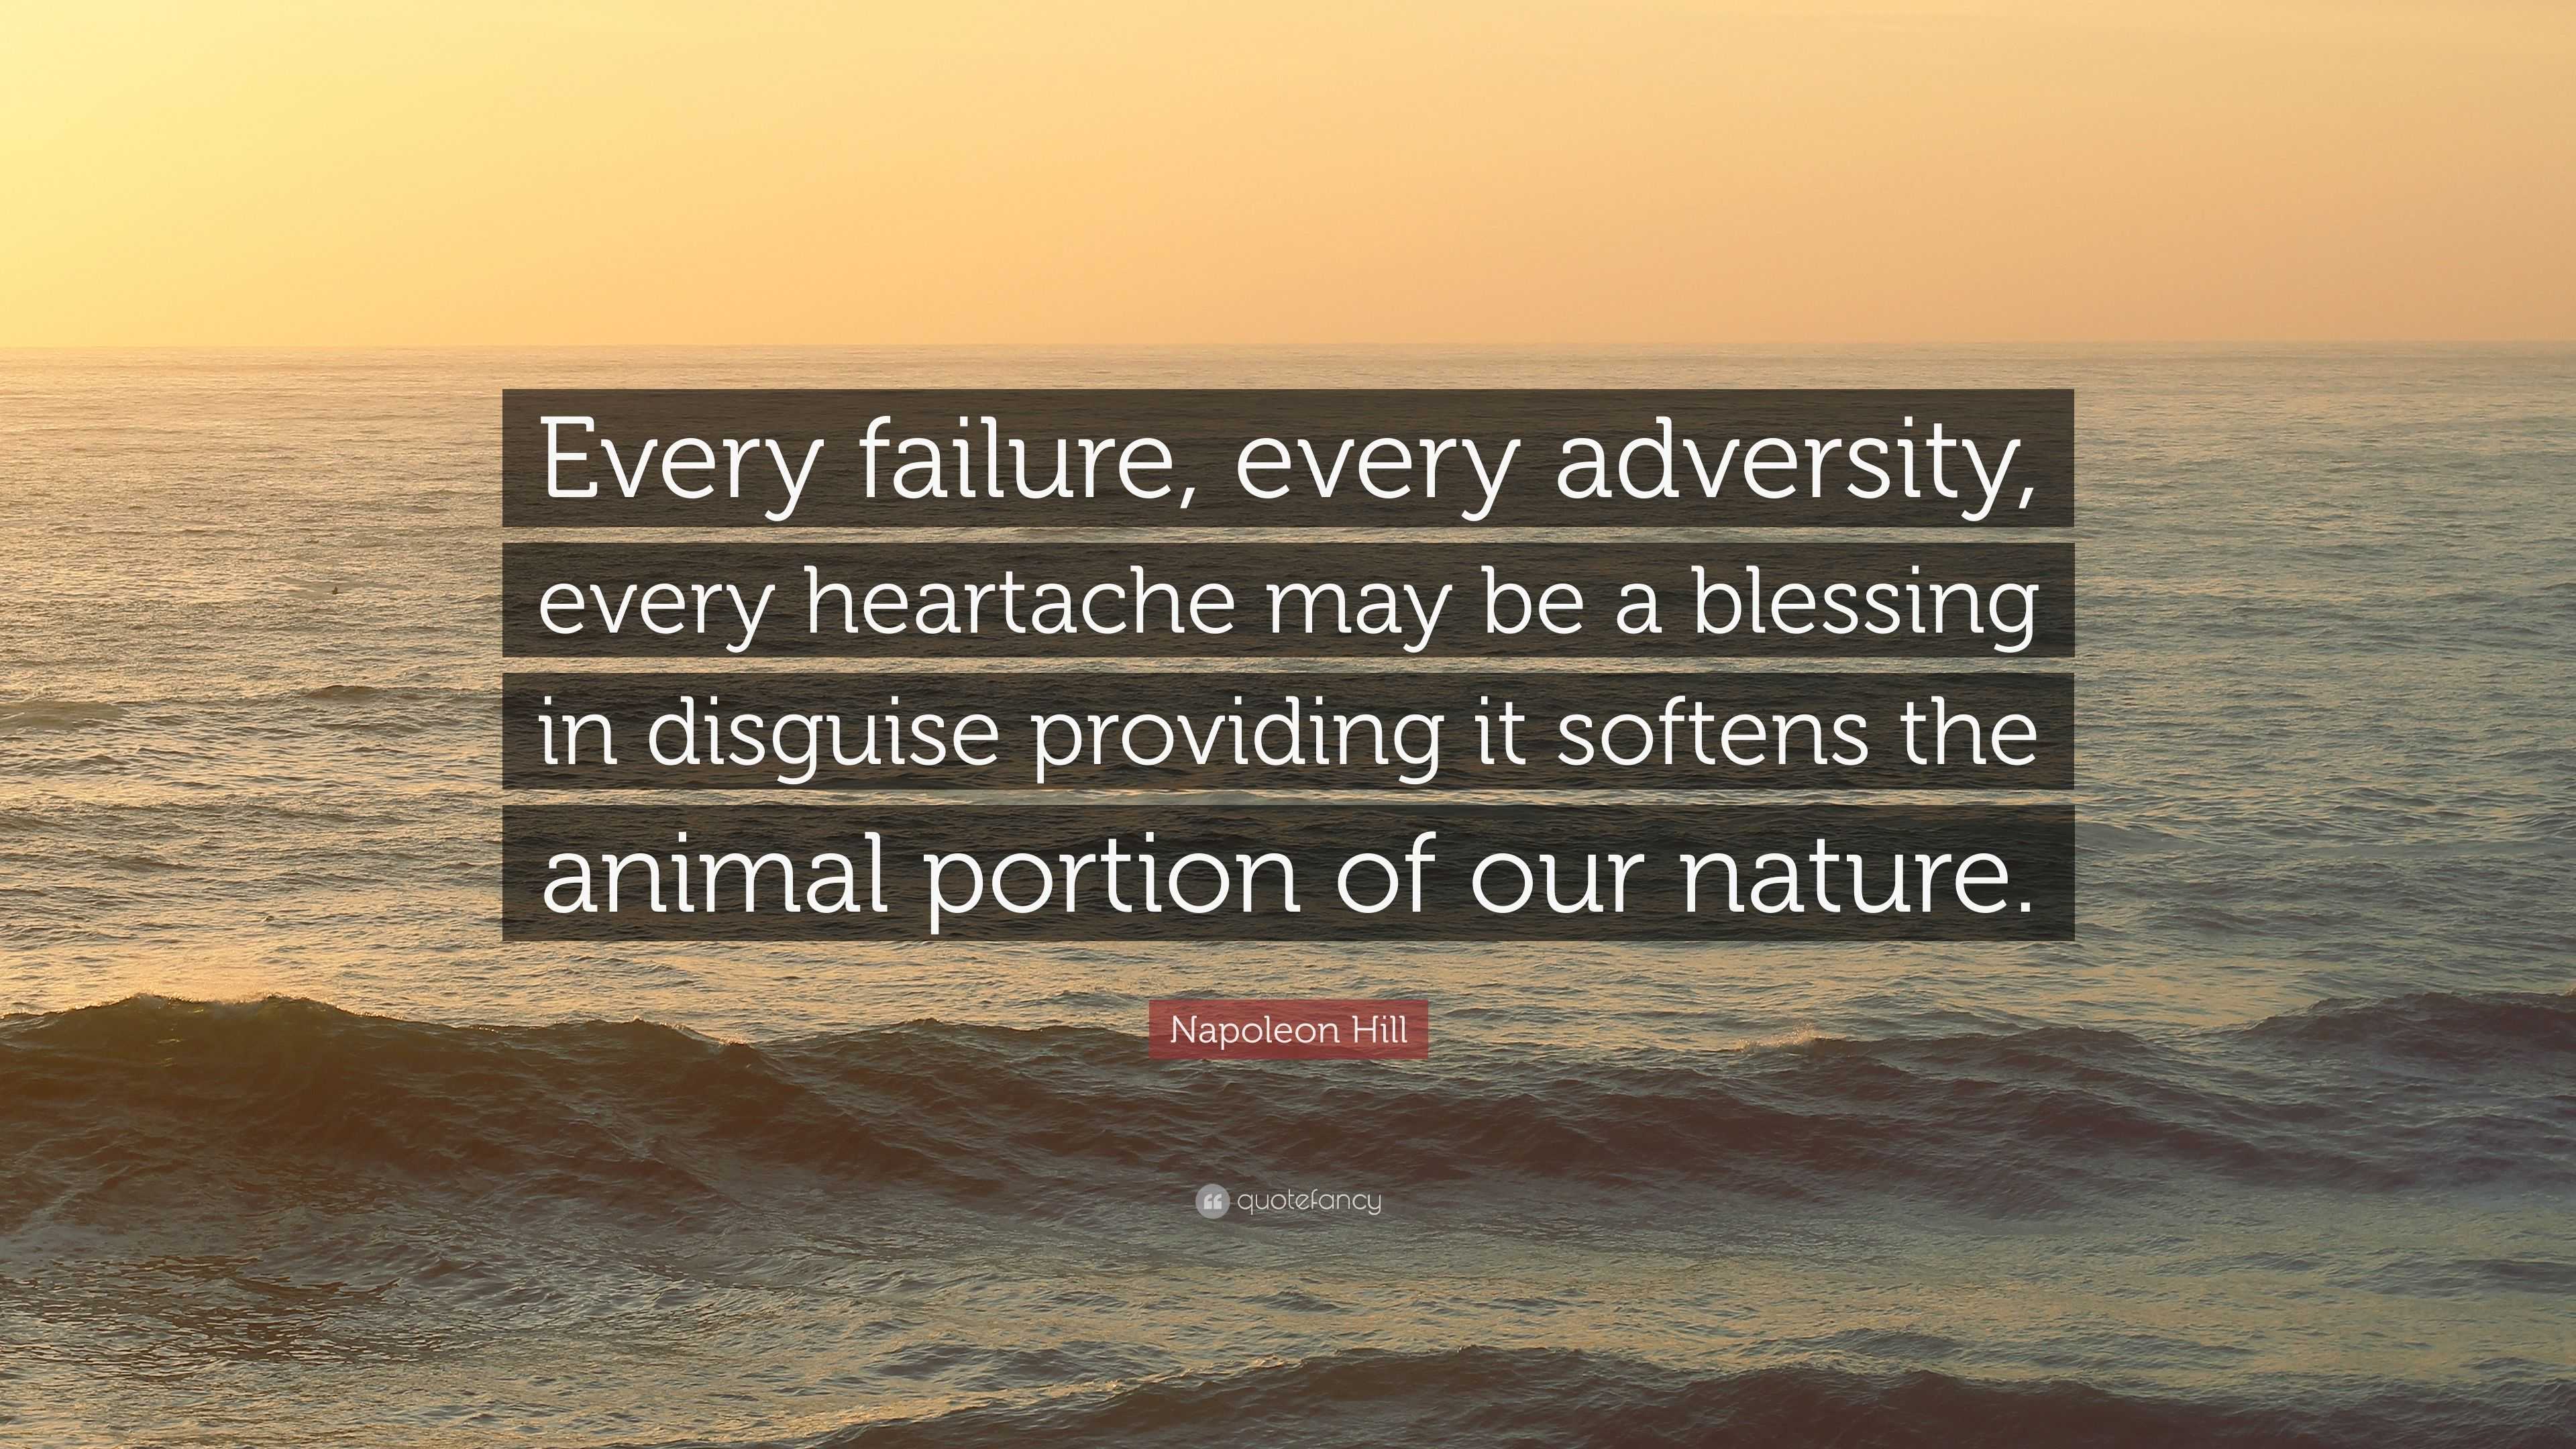 Napoleon Hill Quote “Every failure, every adversity